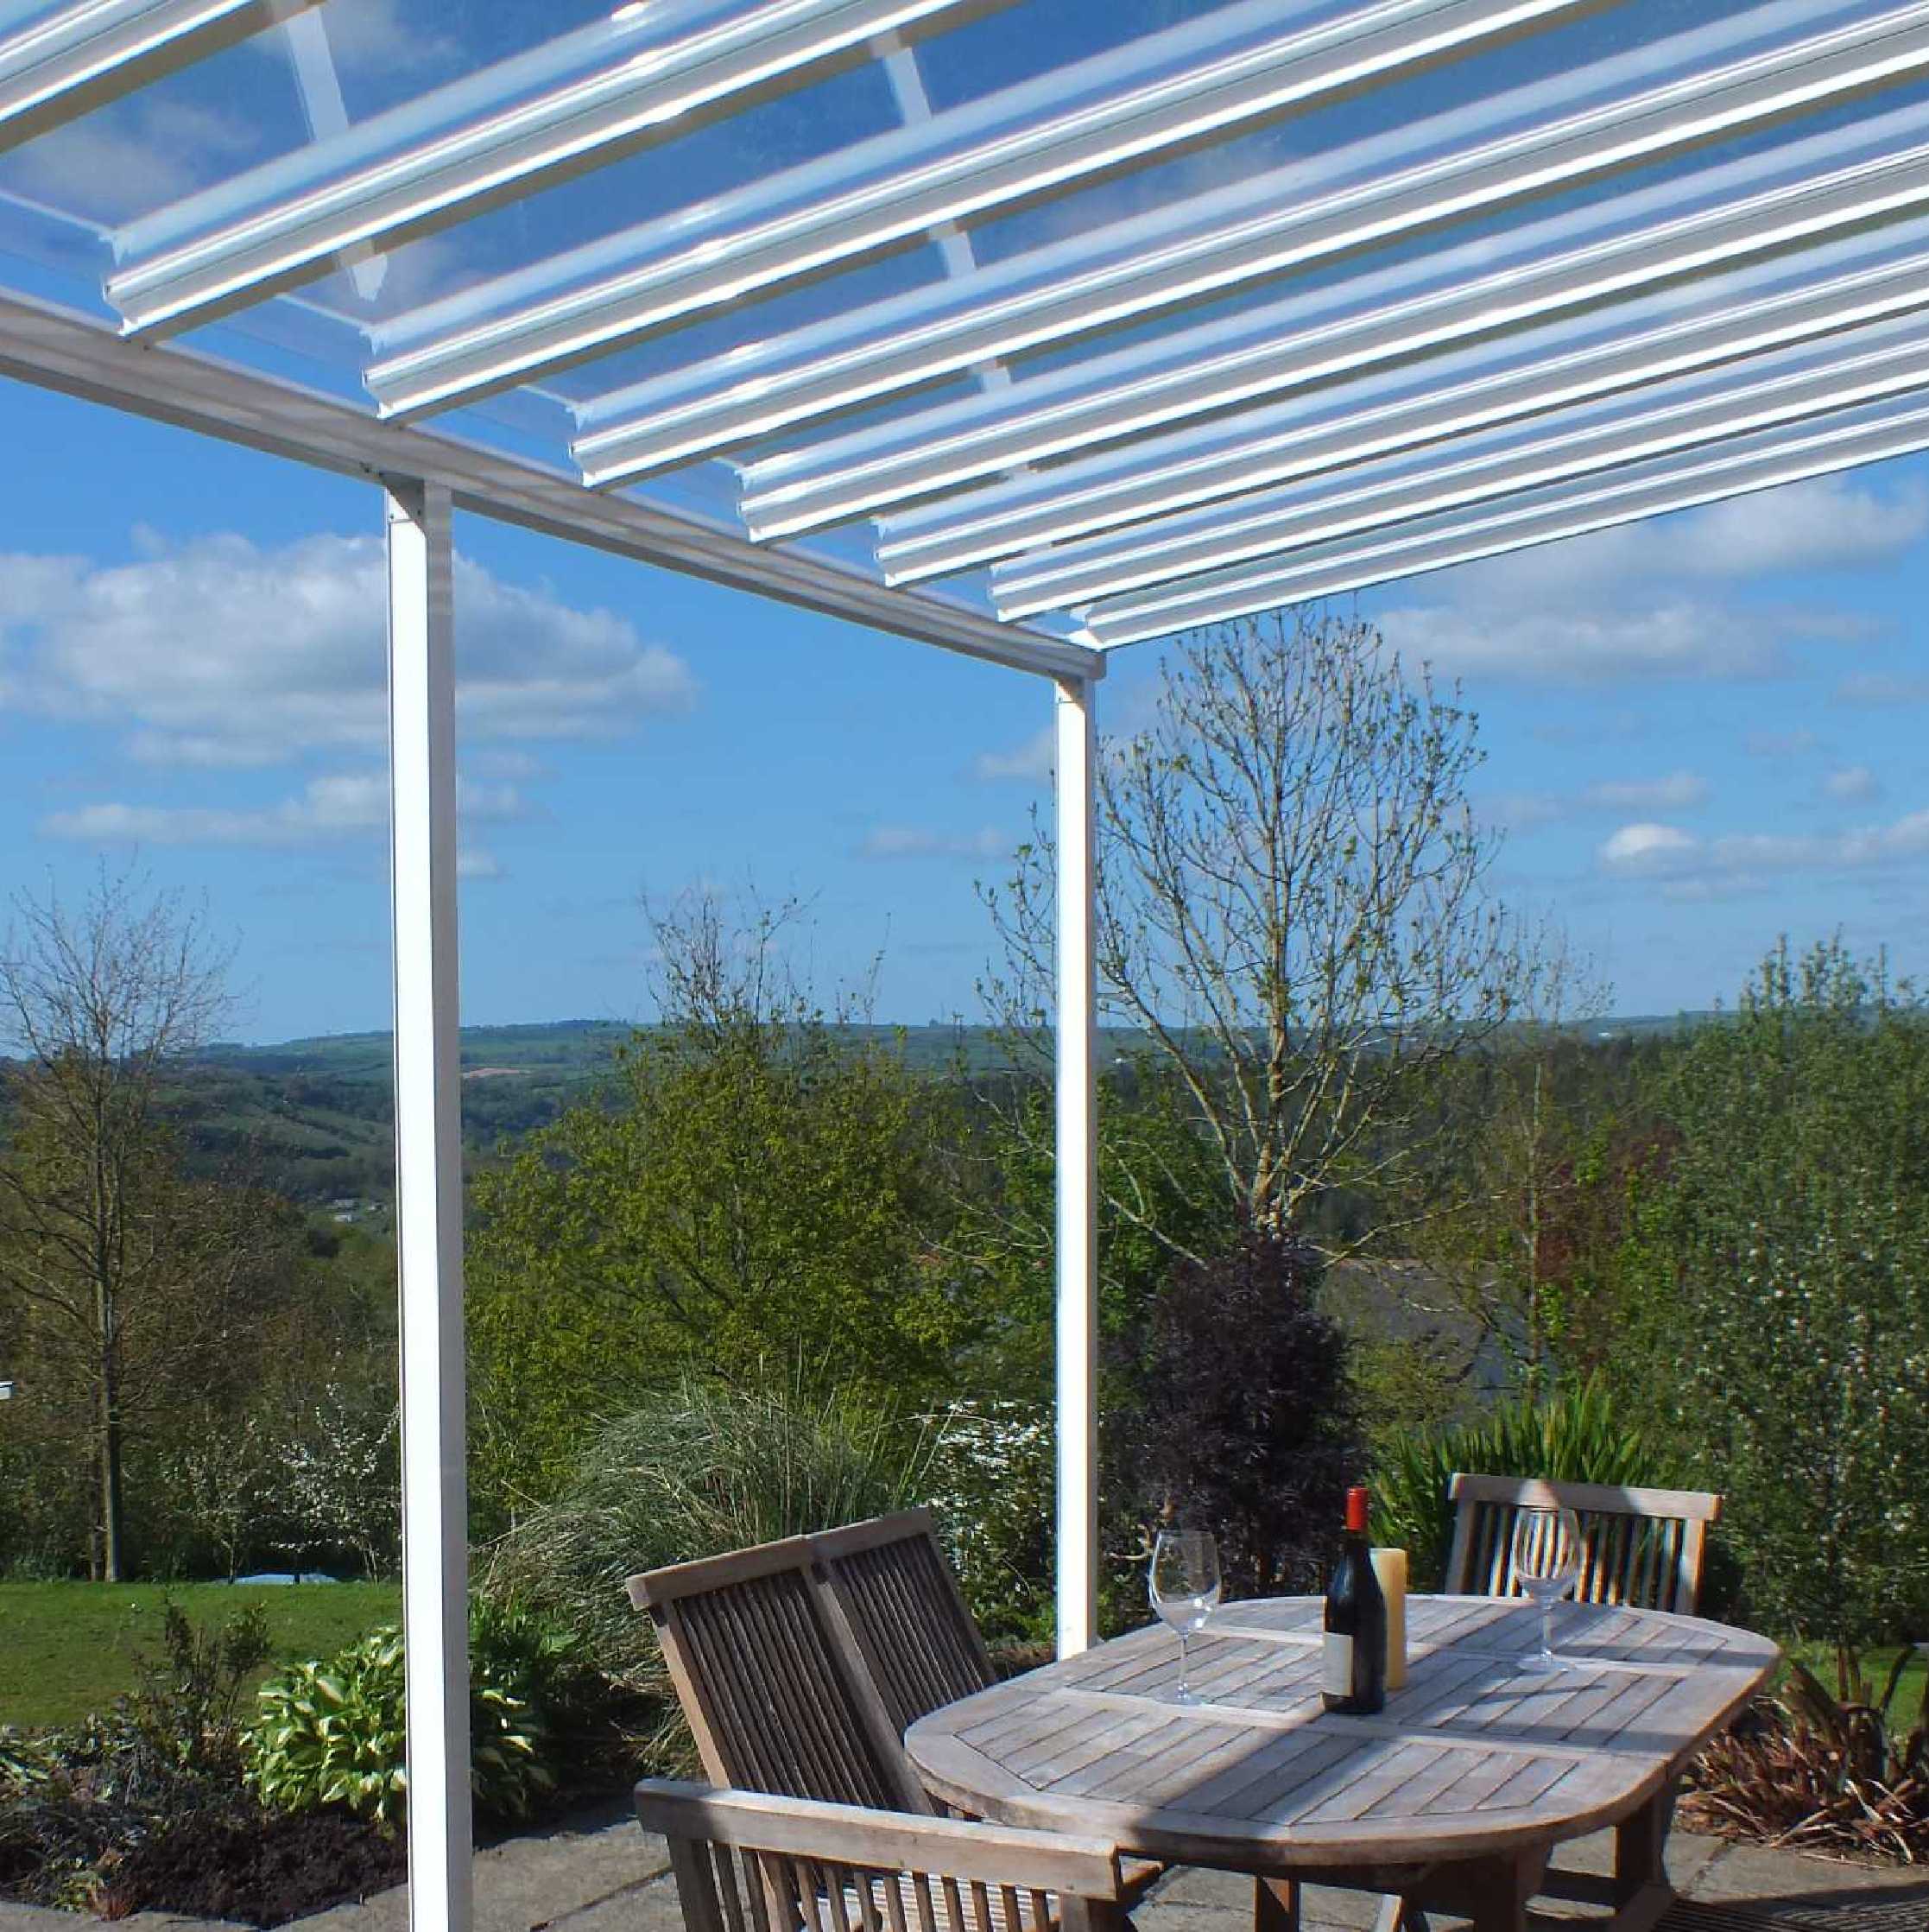 Buy Omega Smart Lean-To Canopy, White with 6mm Glass Clear Plate Polycarbonate Glazing - 9.8m (W) x 3.5m (P), (5) Supporting Posts online today